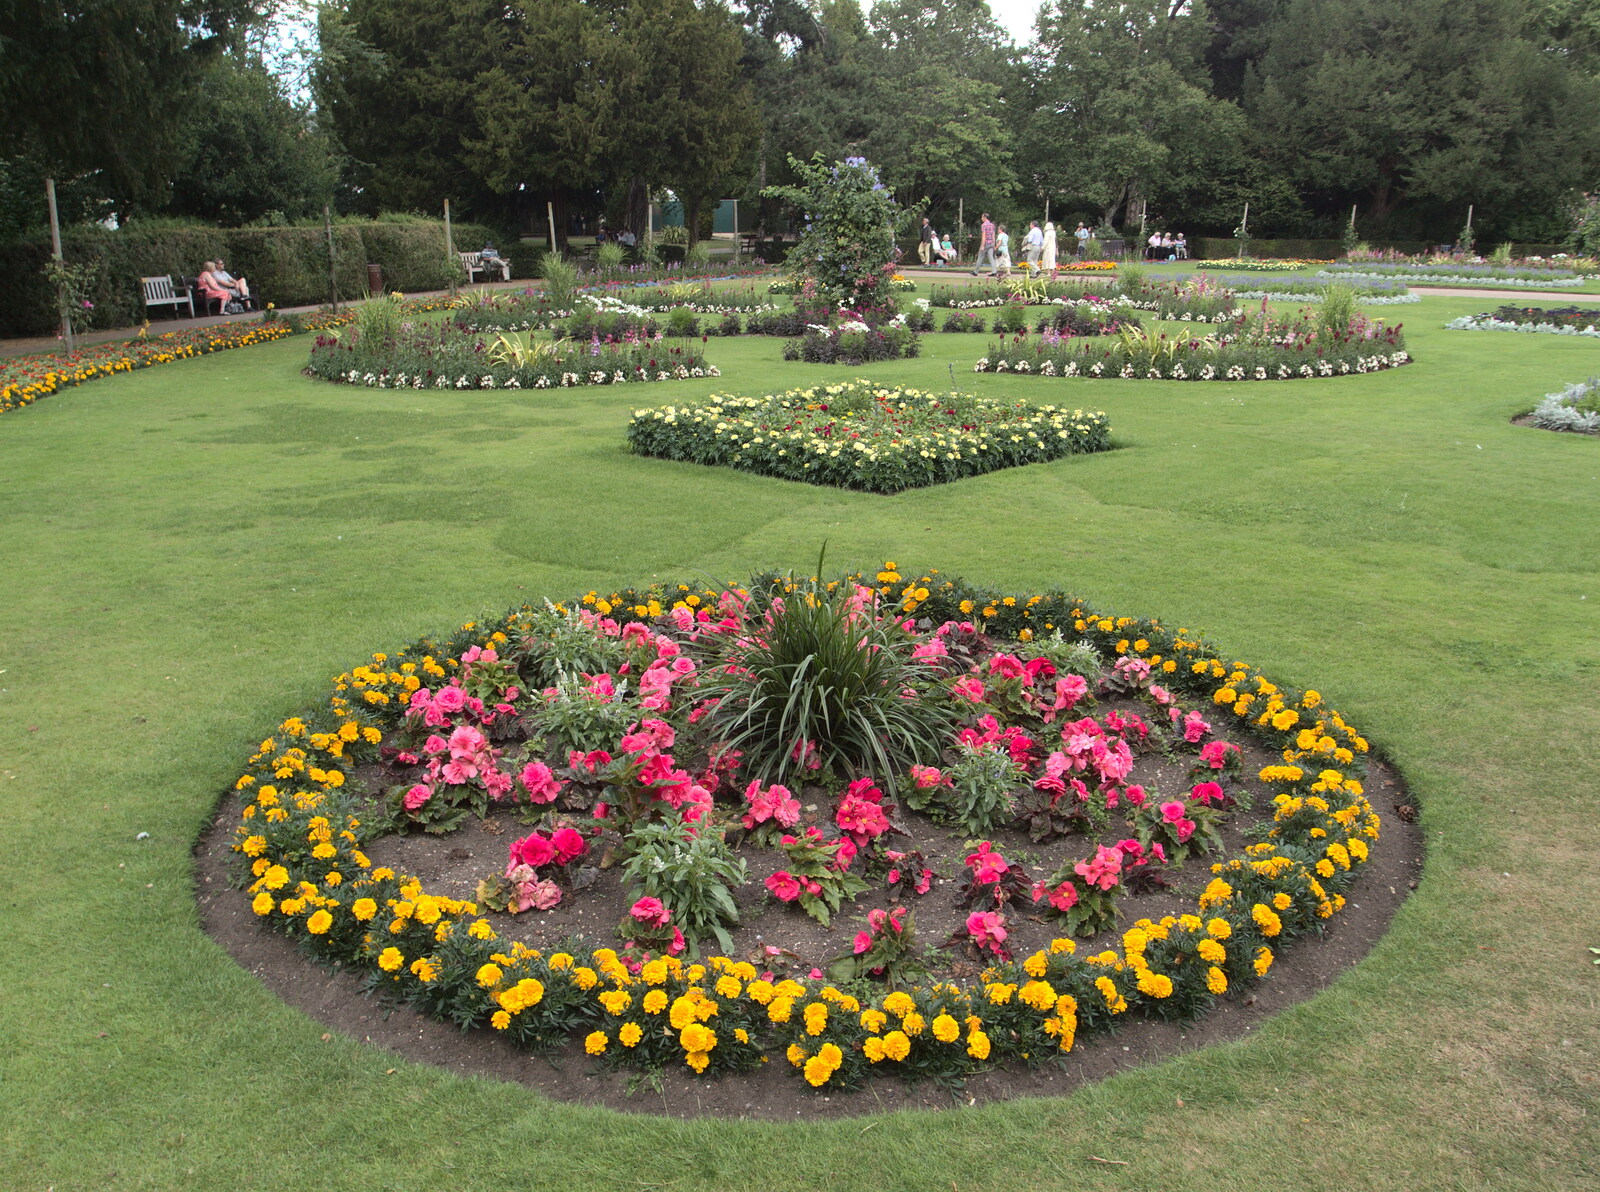 Colourful flower beds from The BBs at Bacton, and Abbey Gardens, Bury St. Edmunds, Suffolk - 19th July 2015